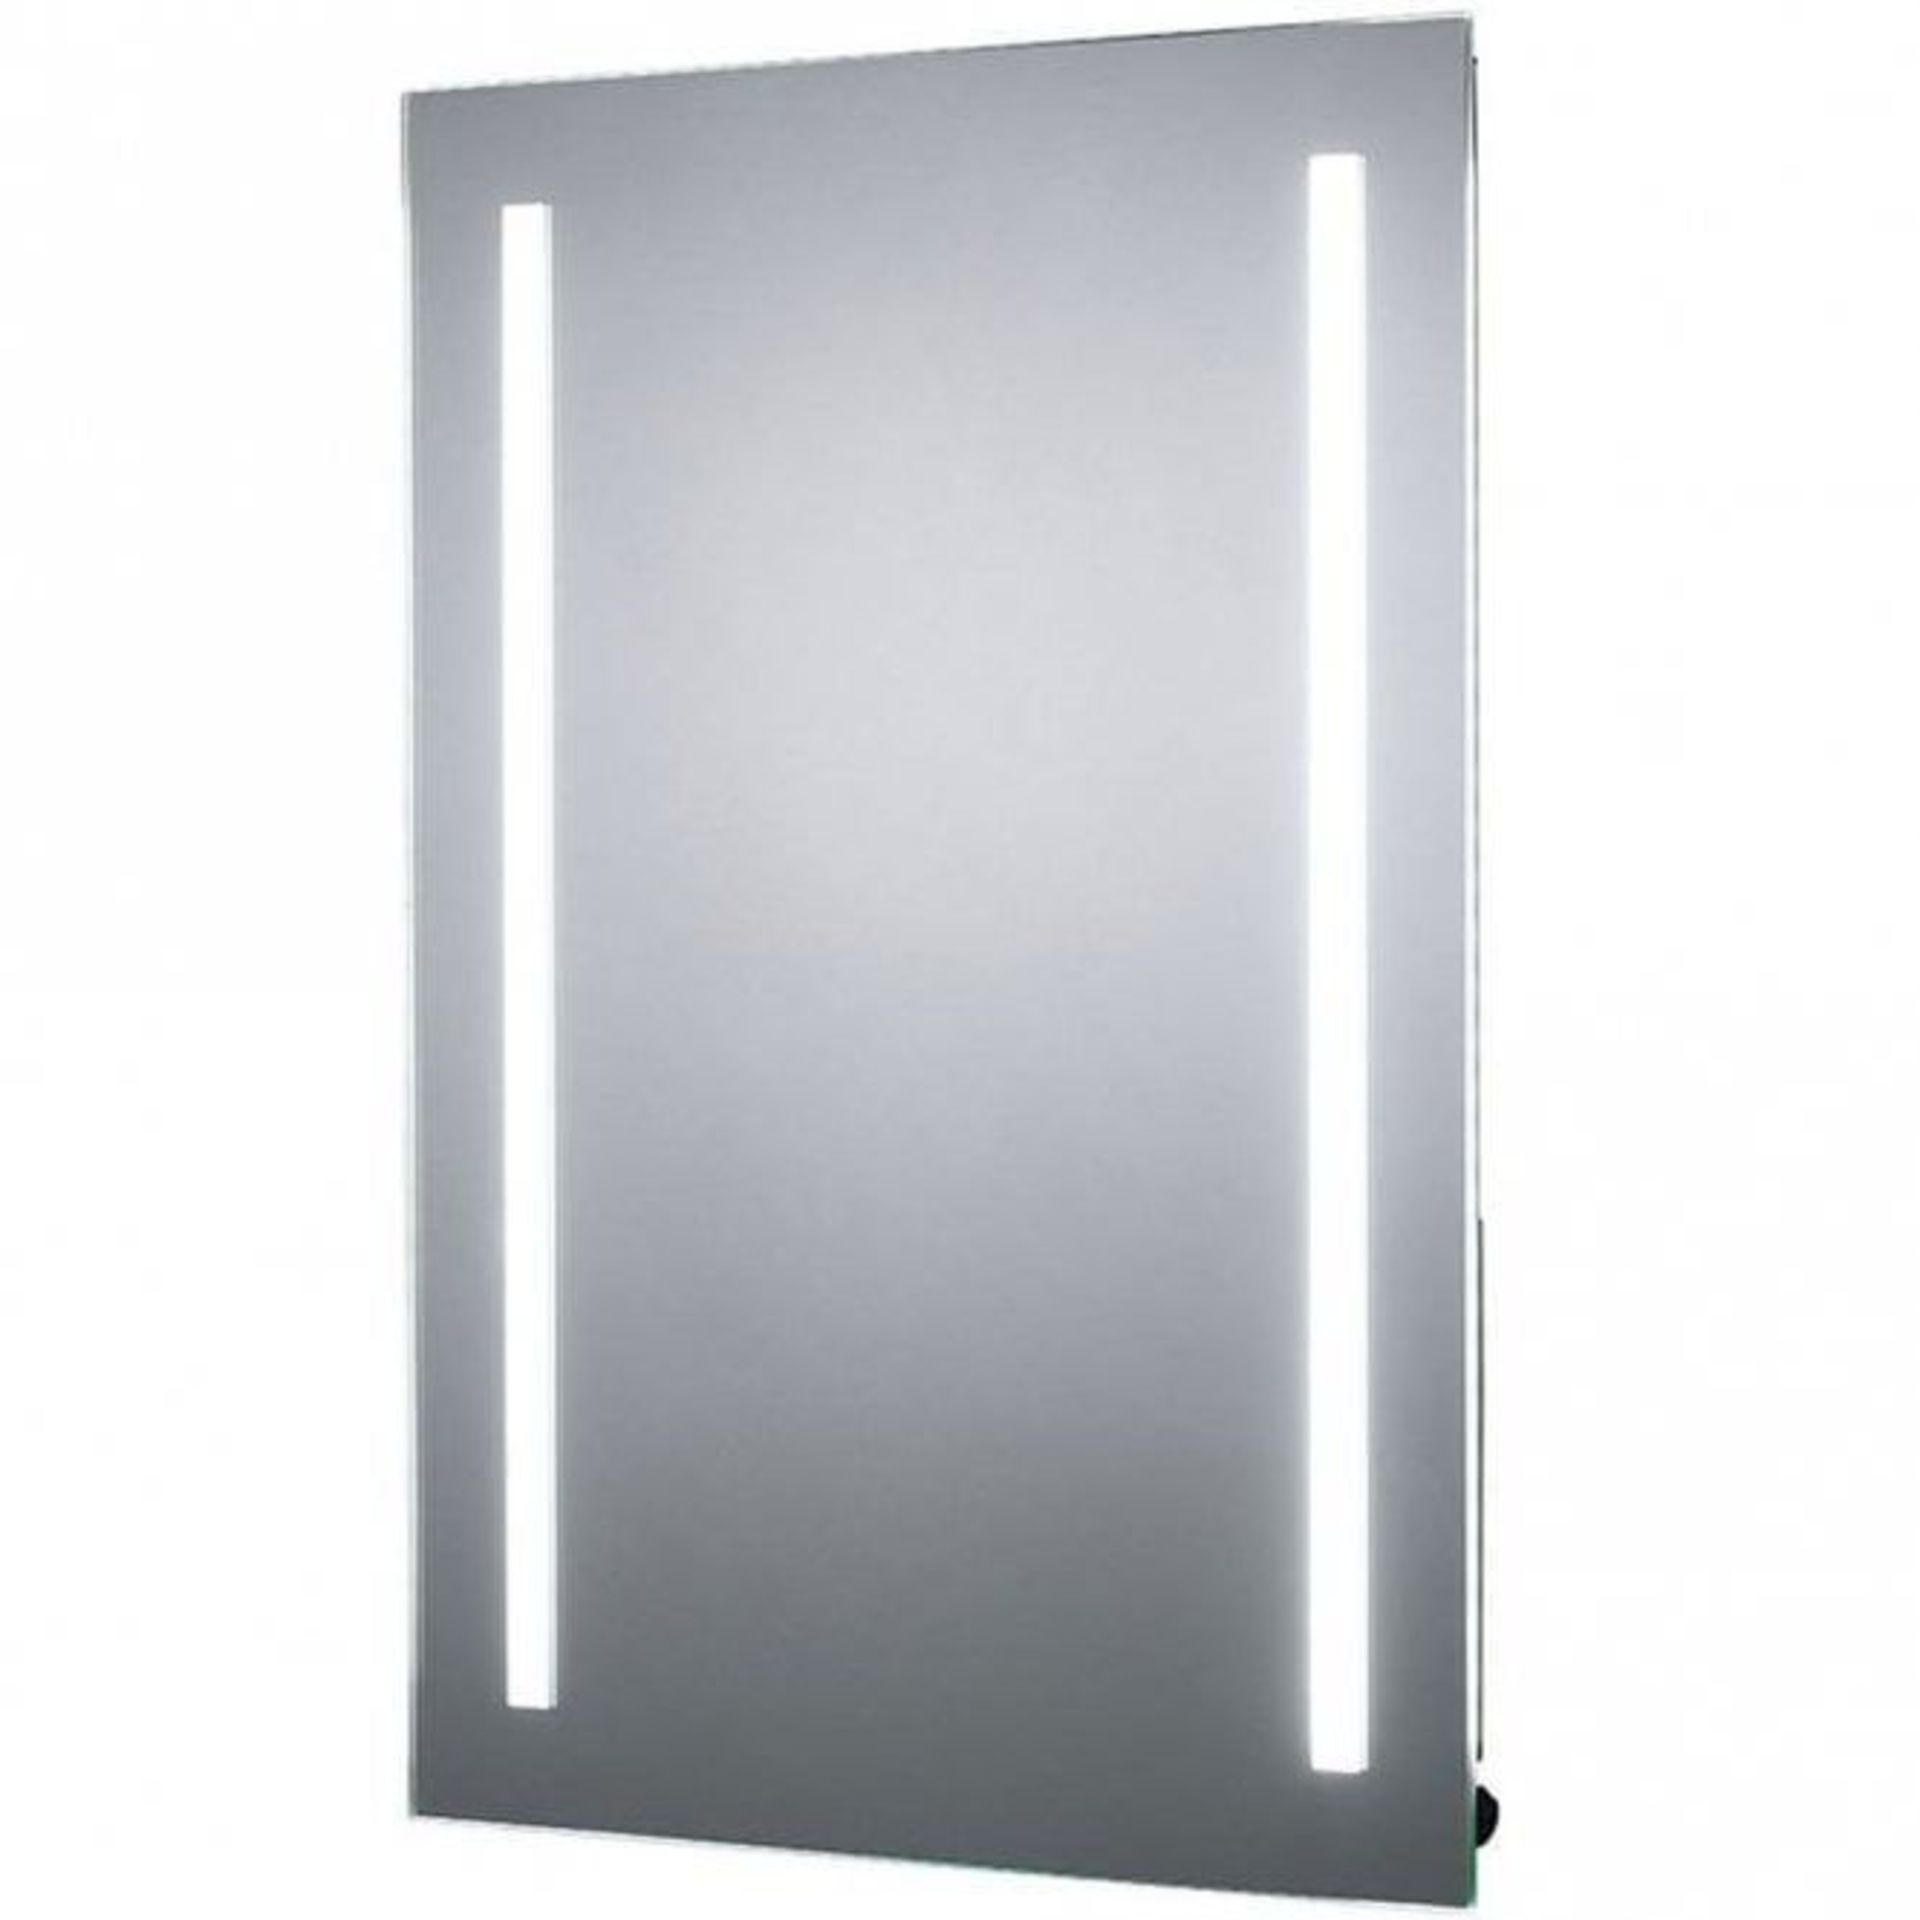 Sensio Gina 700x500mm Cool White Battery Operated Front Diffused LED Mirror. - R14.1. Ideal for - Image 2 of 2